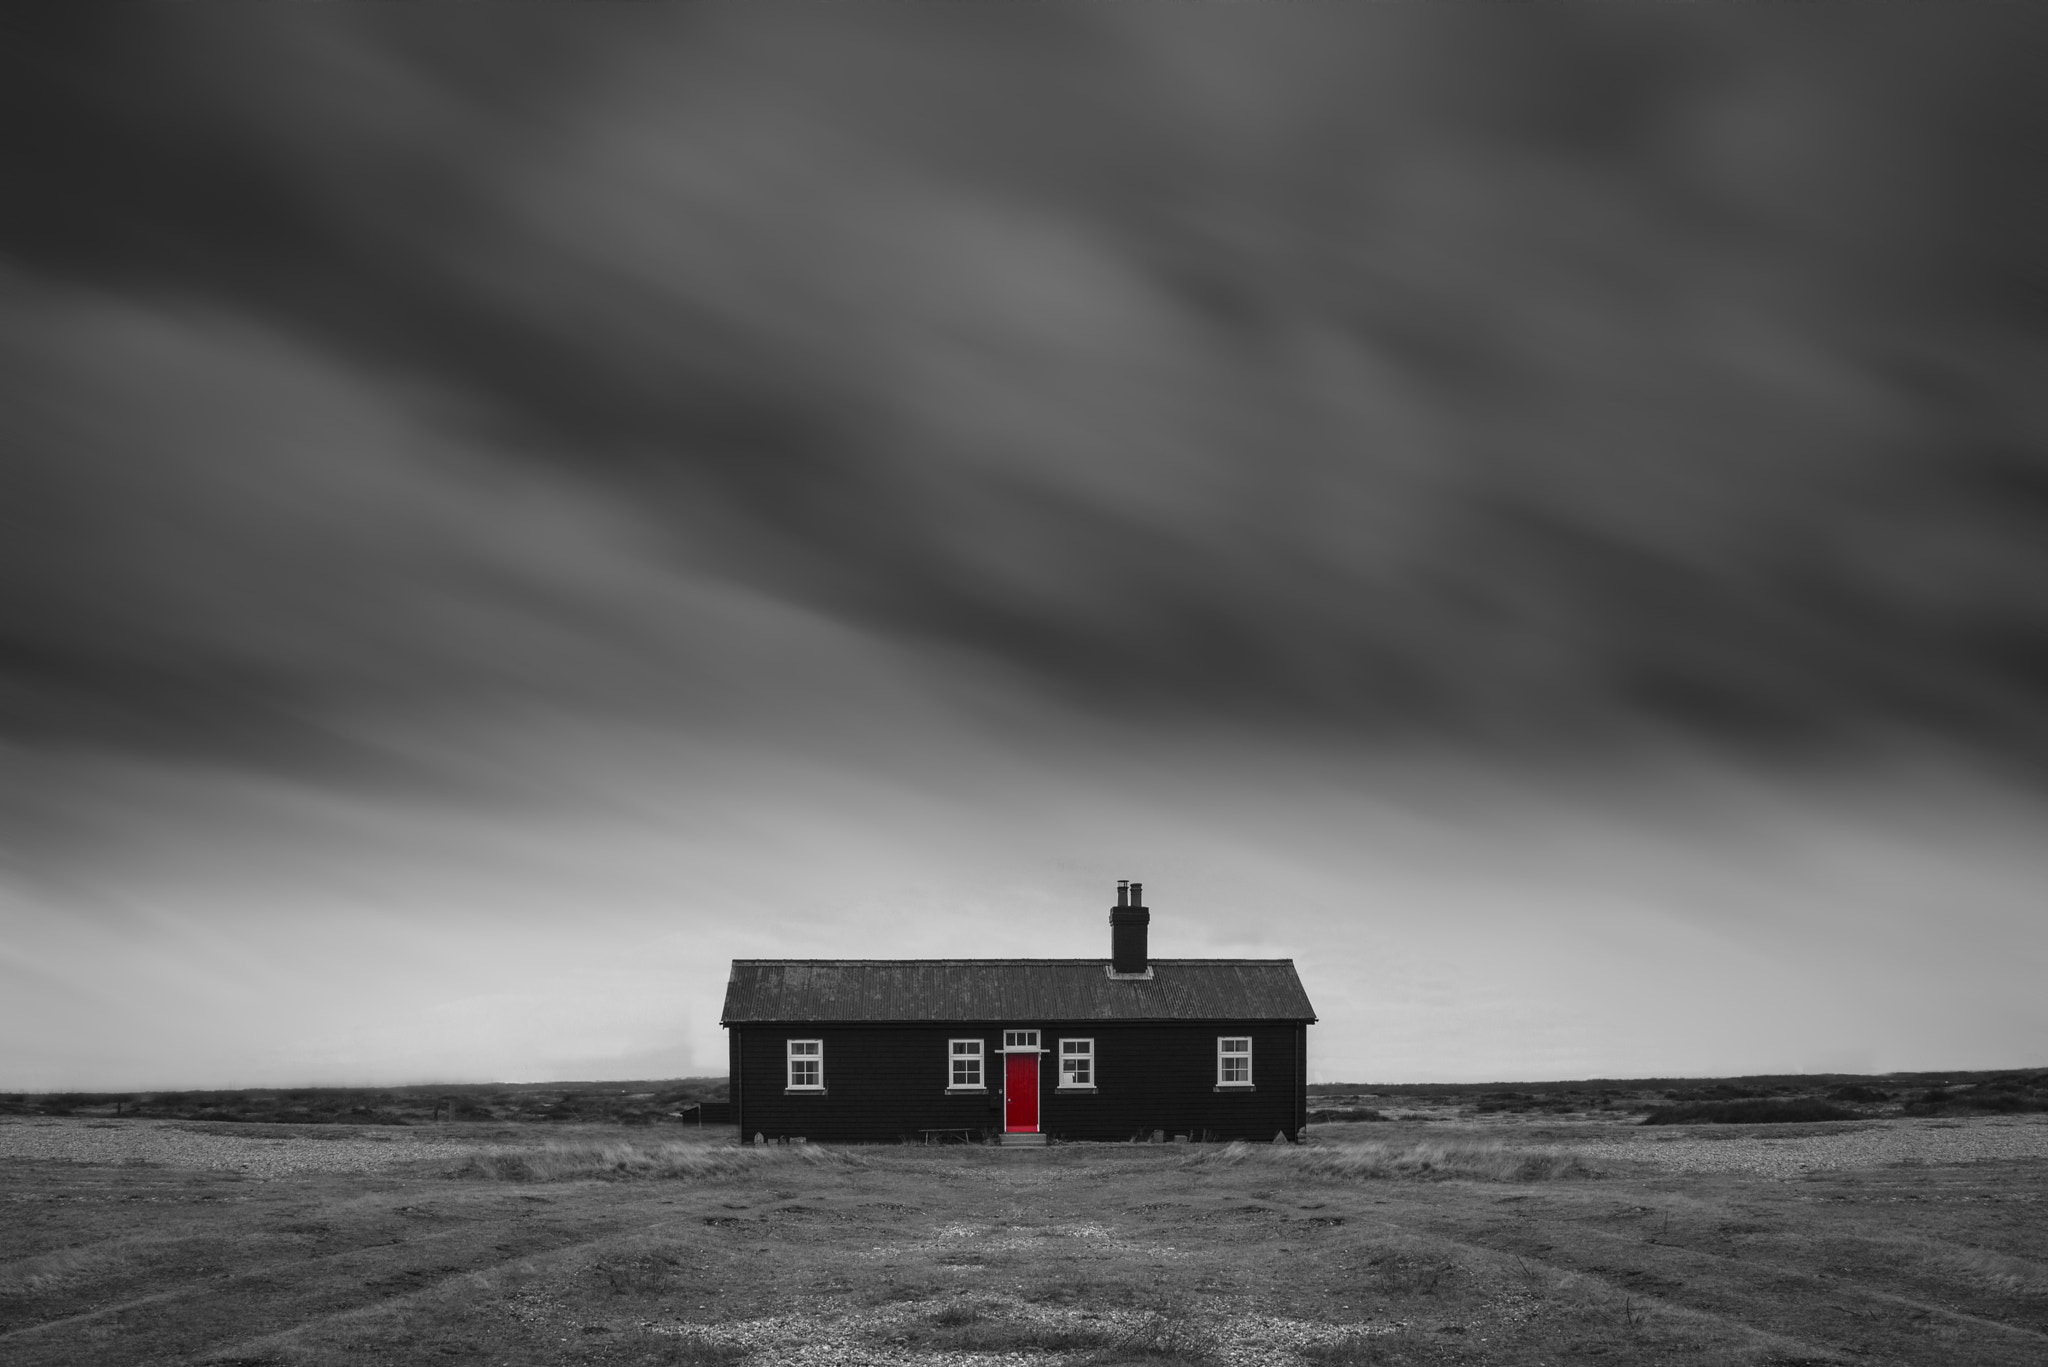 Nikon D800 + Nikon AF-S Nikkor 24-85mm F3.5-4.5G ED VR sample photo. Remote desolate isolated house under dark stormy sky during wint photography